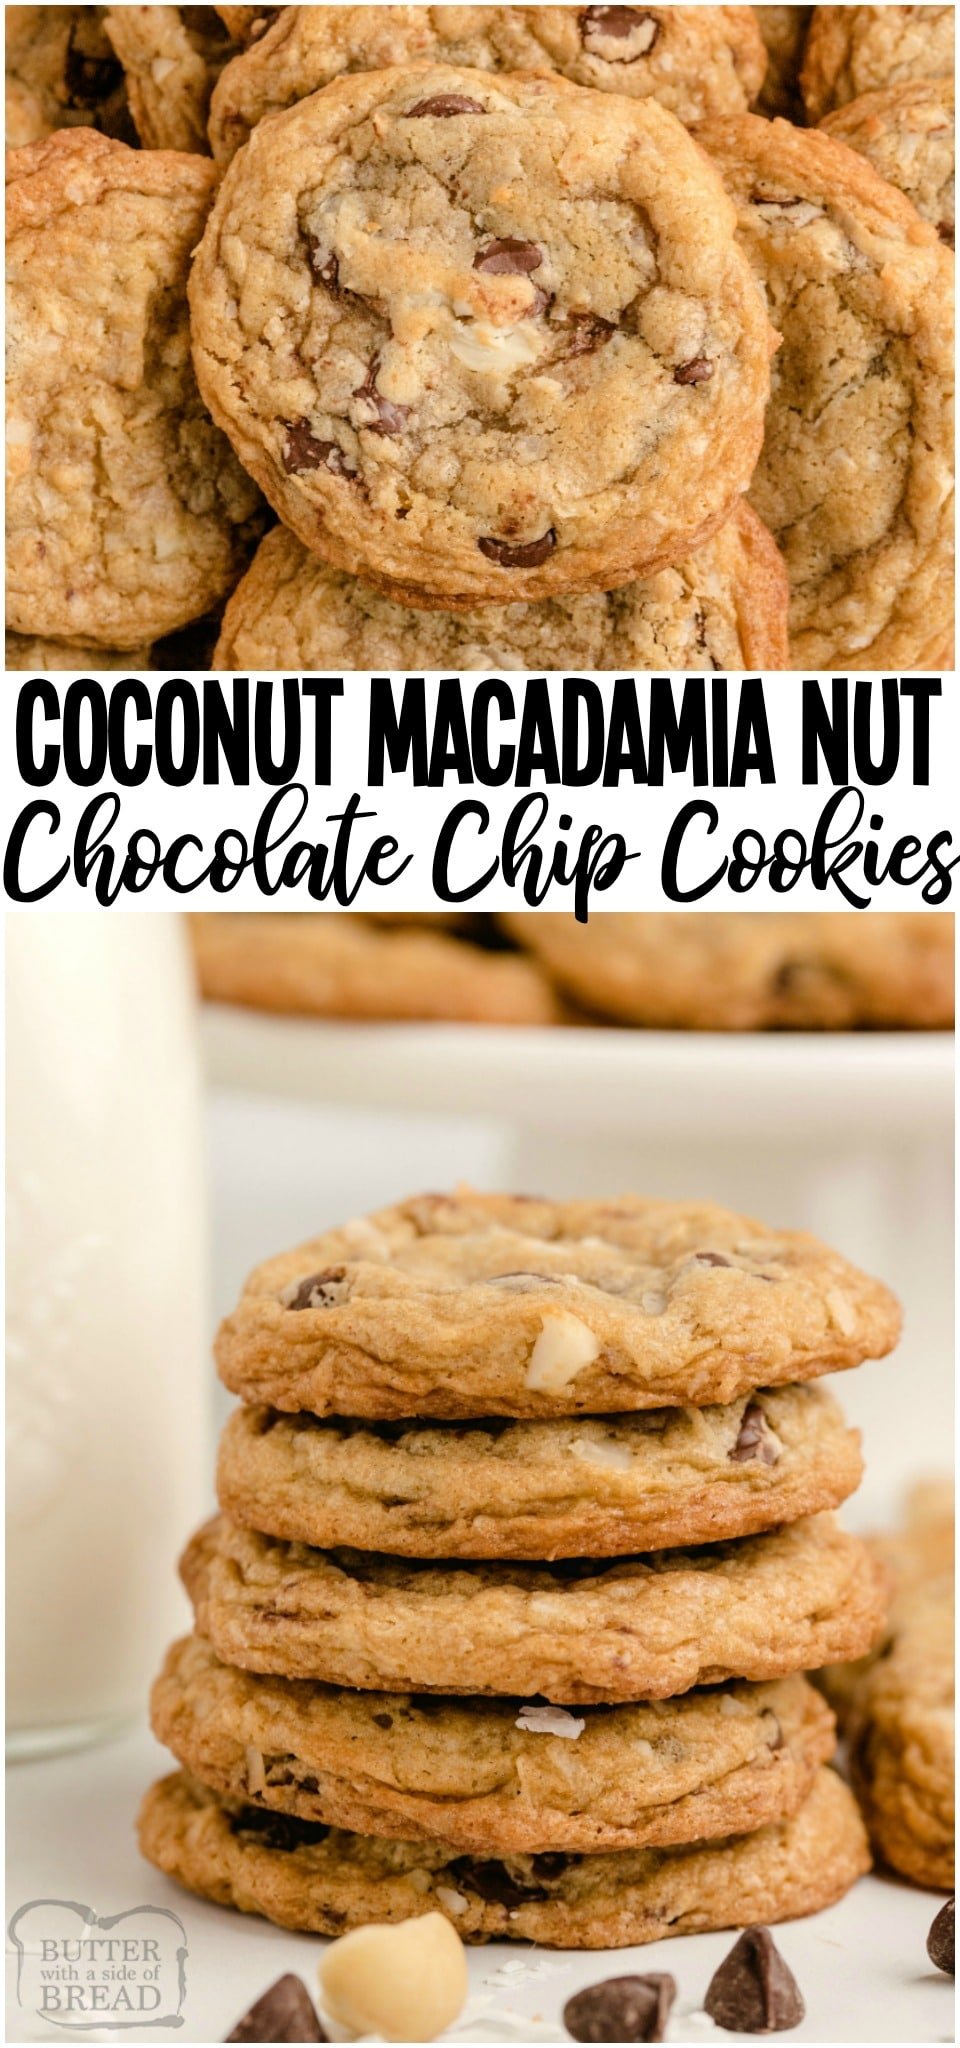 Coconut Macadamia Nut Cookies loaded with sweet coconut, chocolate chips & chopped macadamia nuts! Over the top chocolate chip cookie recipe with fantastic flavor, buttery crisp edges and a soft & chewy center.